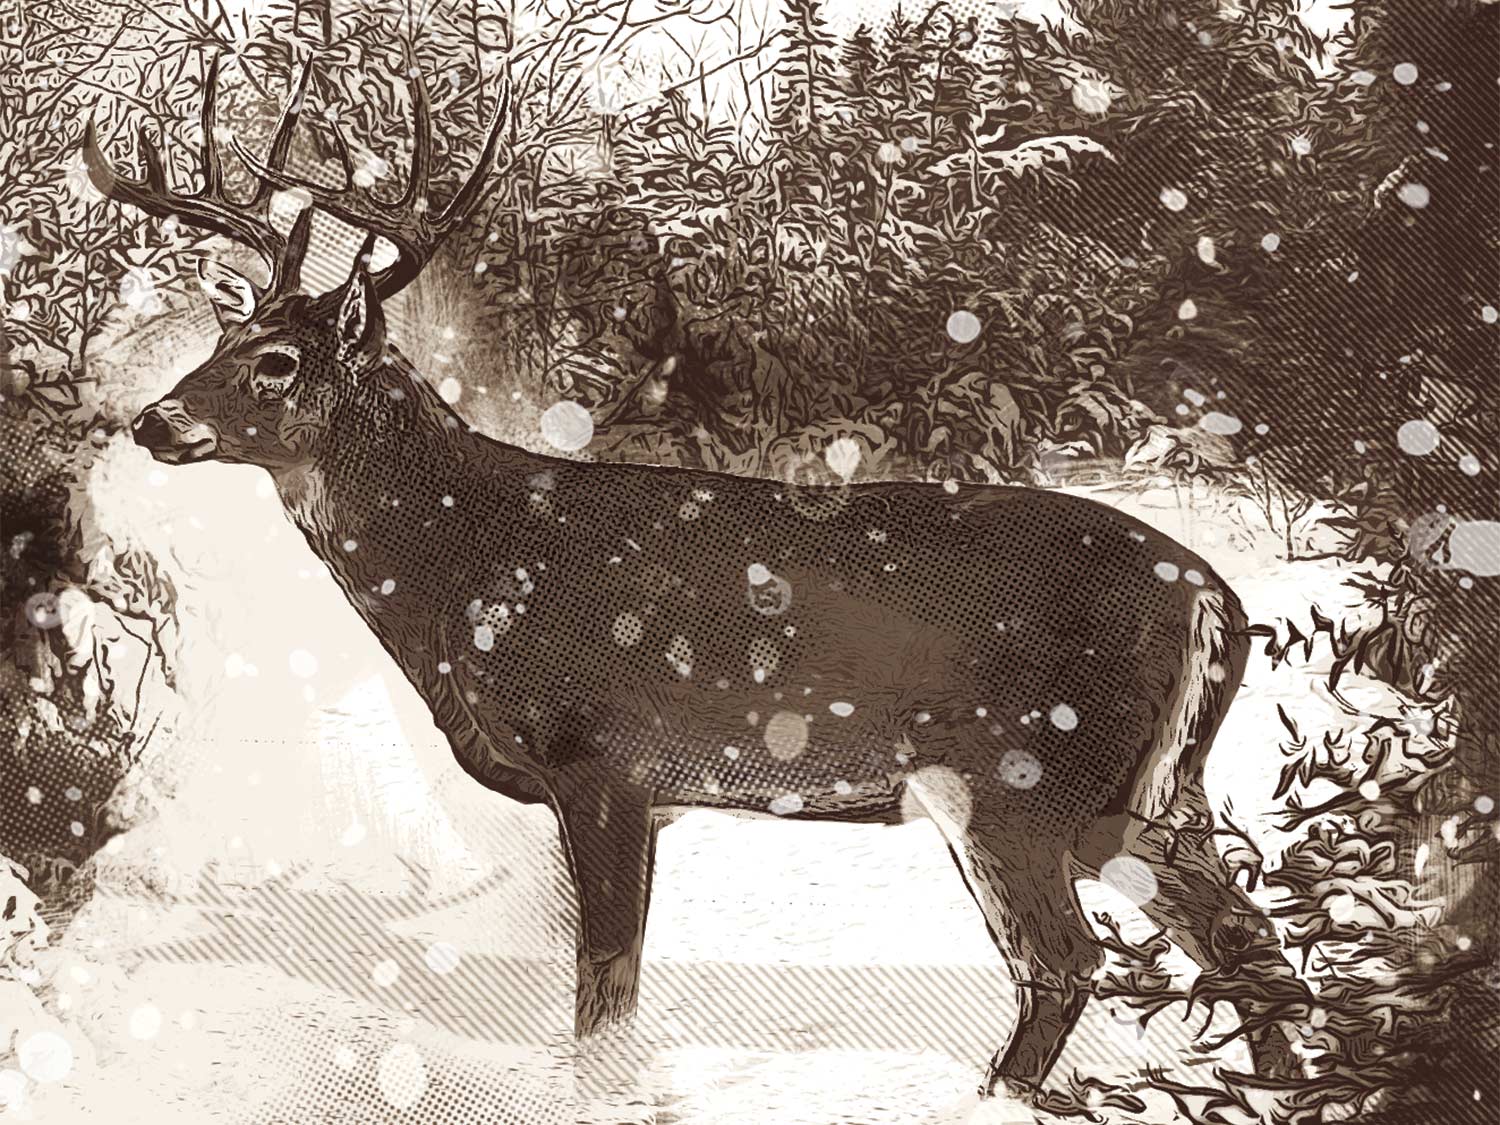 Illustration of a deer in the snow.